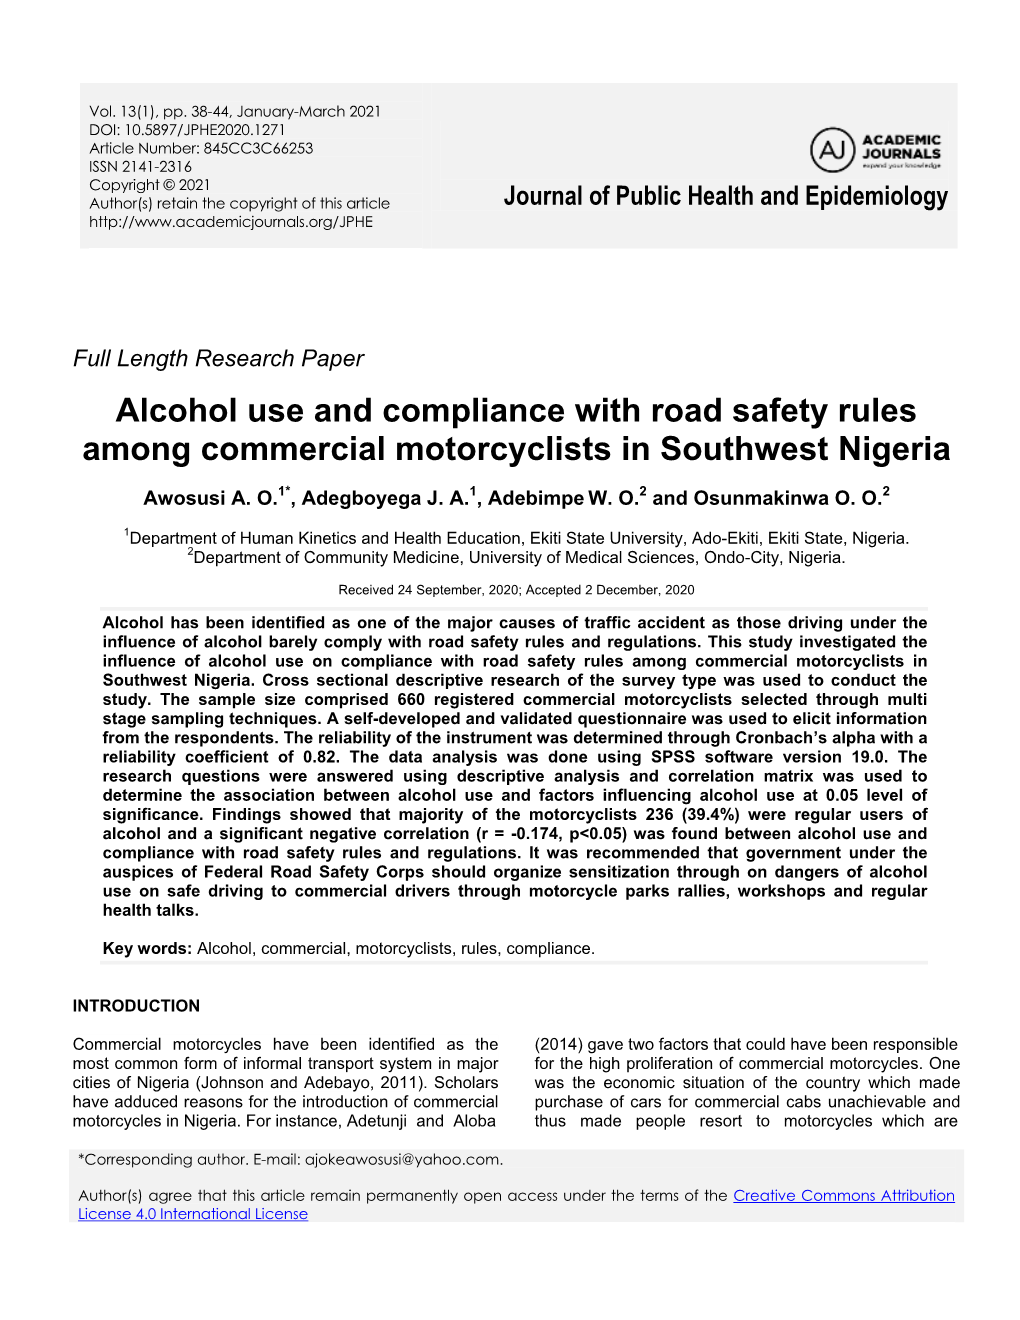 Alcohol Use and Compliance with Road Safety Rules Among Commercial Motorcyclists in Southwest Nigeria